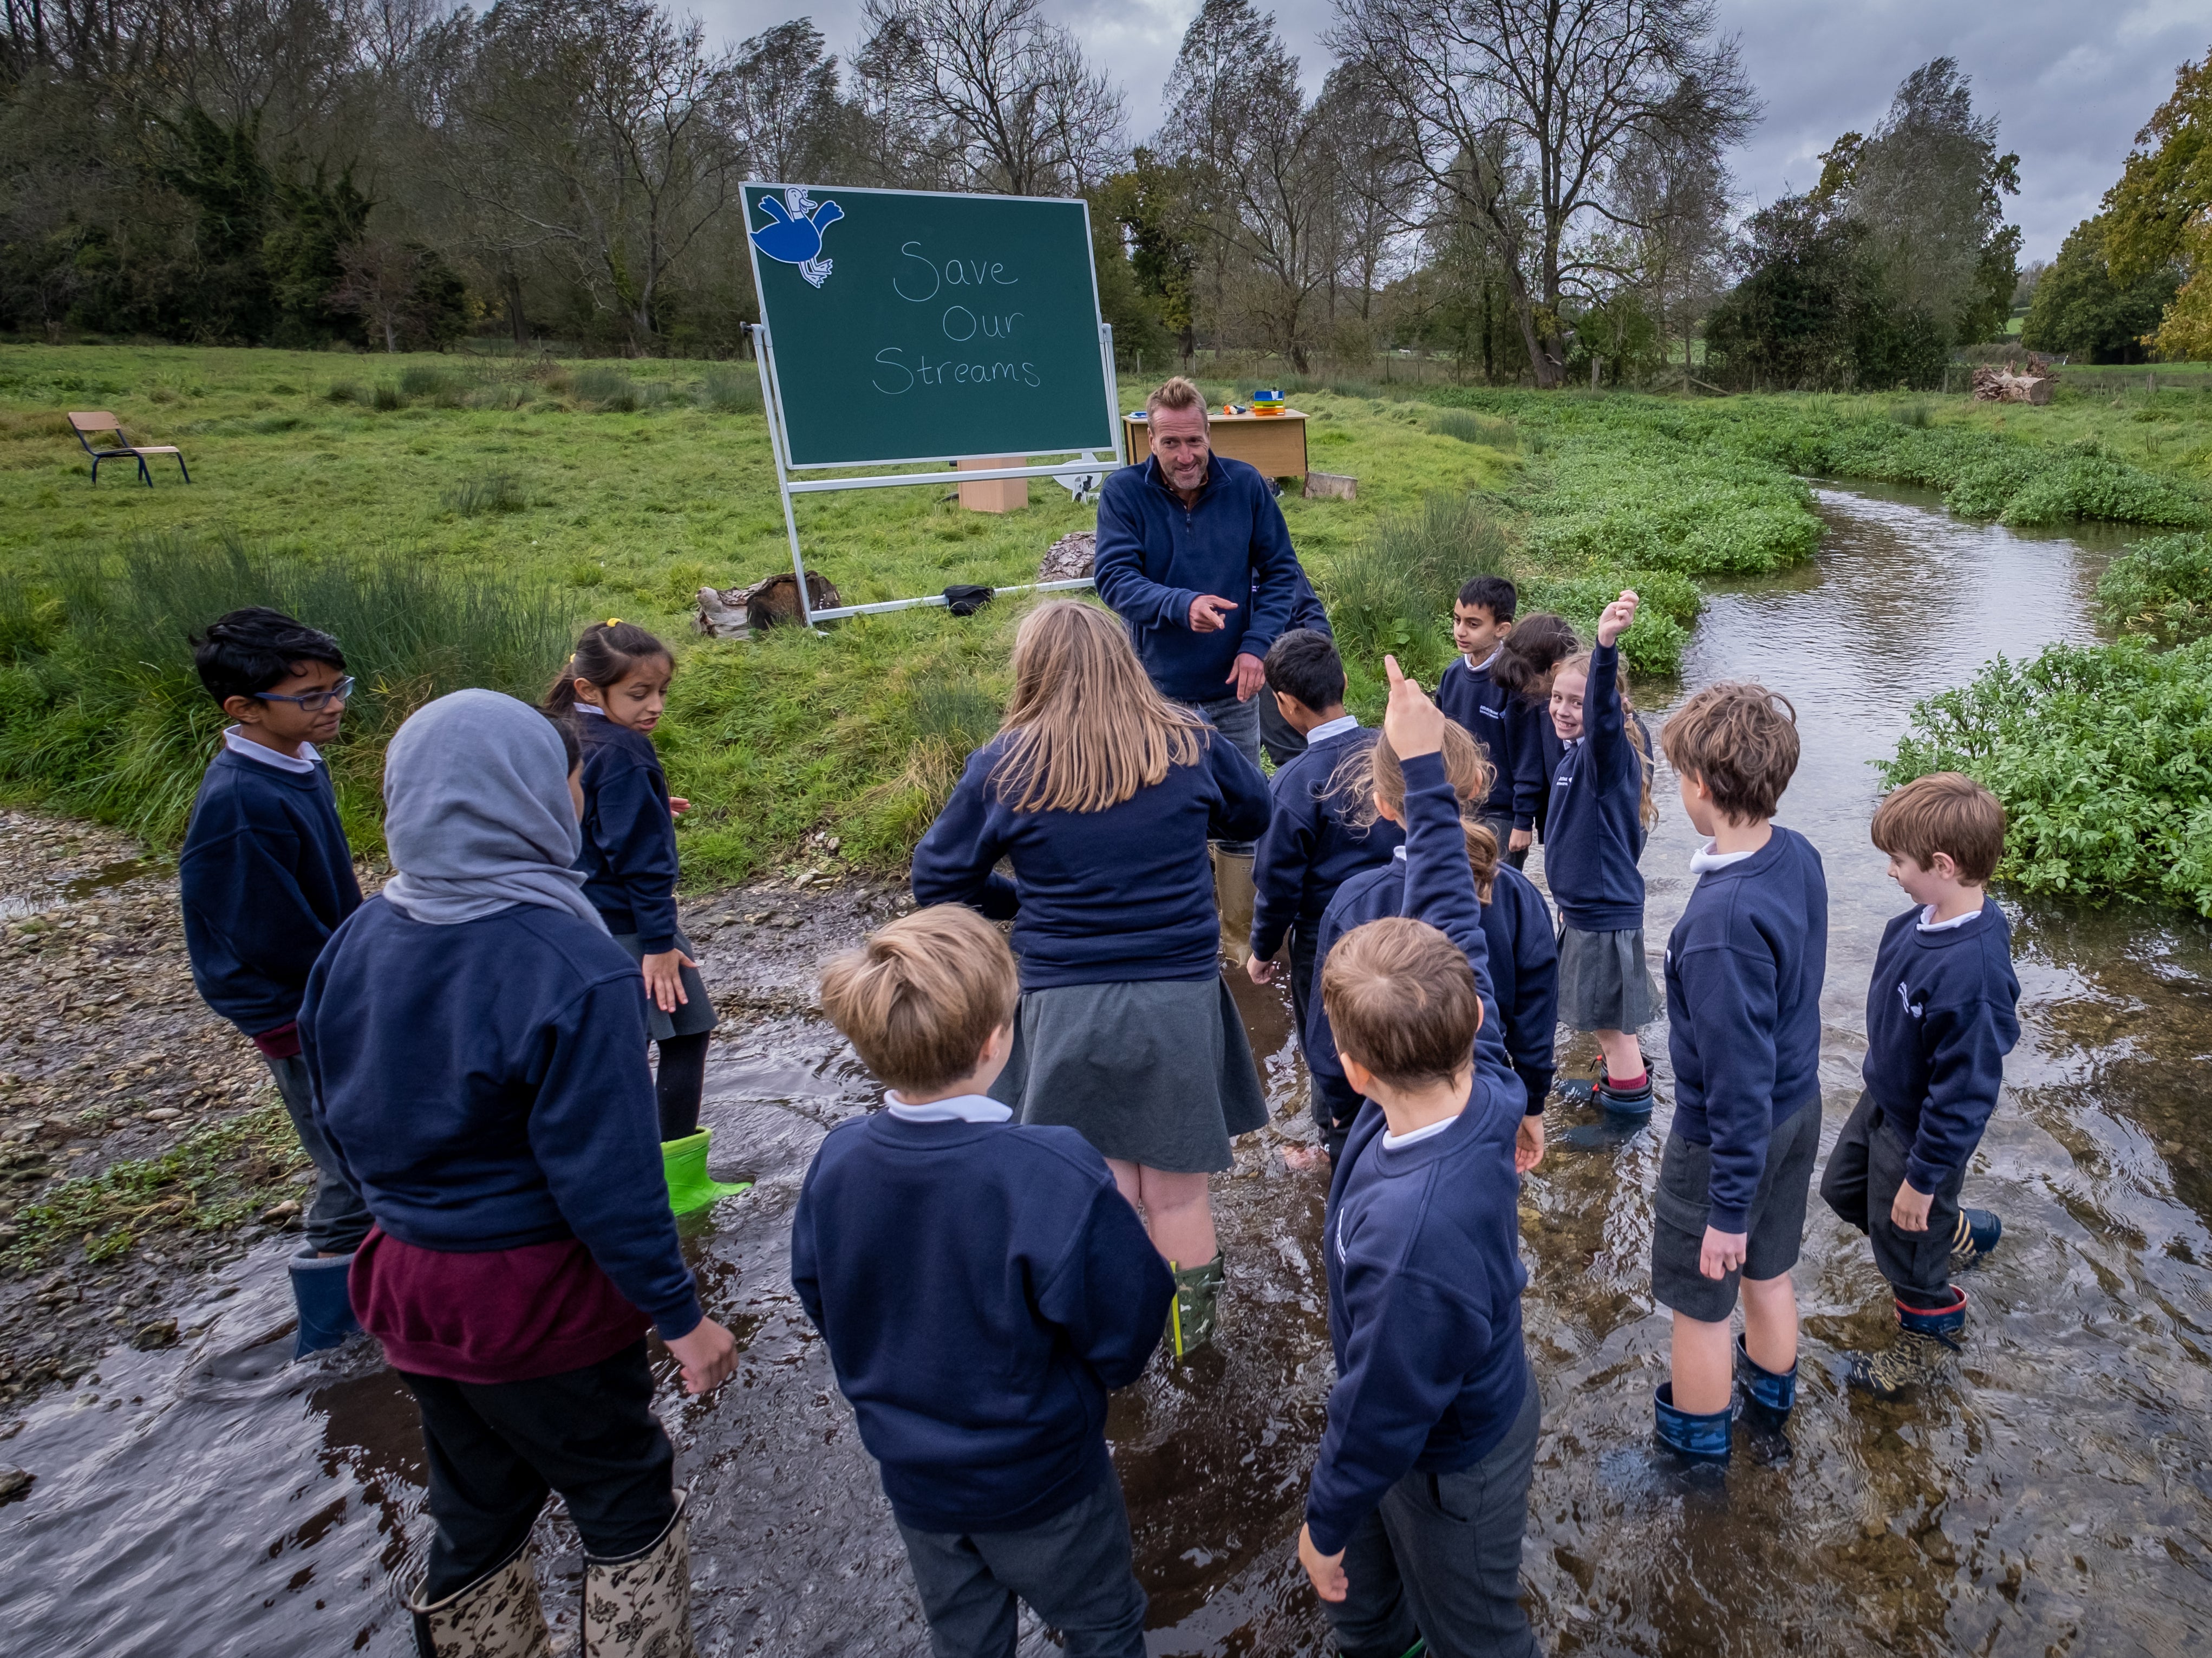 The findings were released as part of a new drive to save Britain’s streams